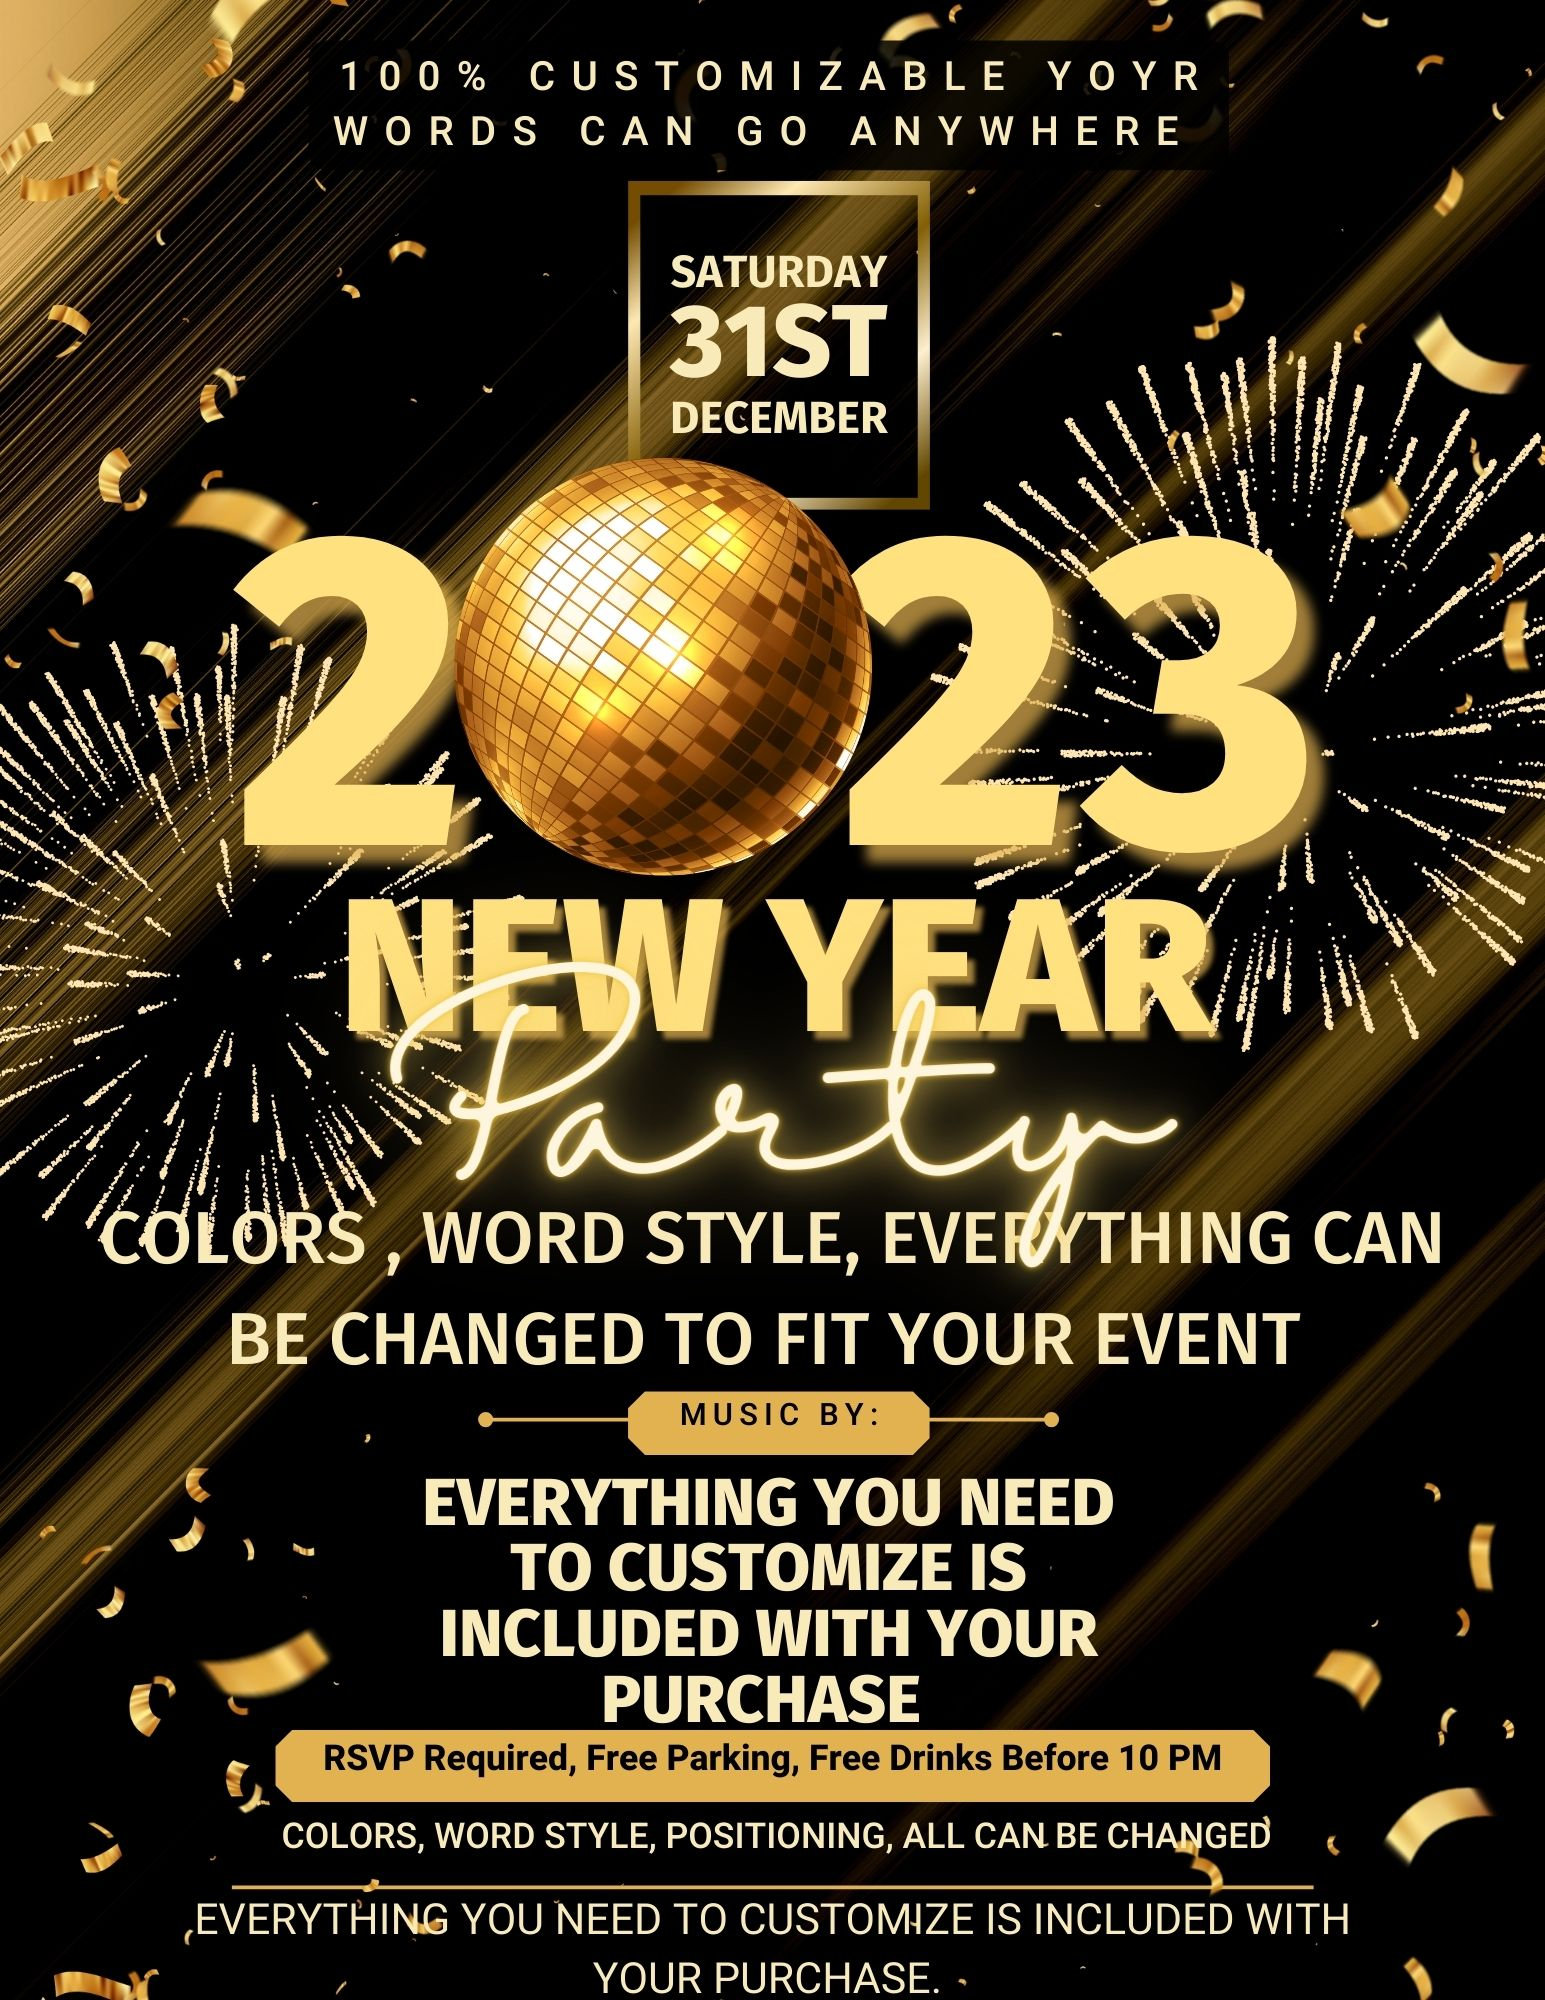 New Year's Eve Party Flyer/animated Social Media Post Template. 100%  Customizable Colors, Wording, Icons, Positioning All Can Be Changed 